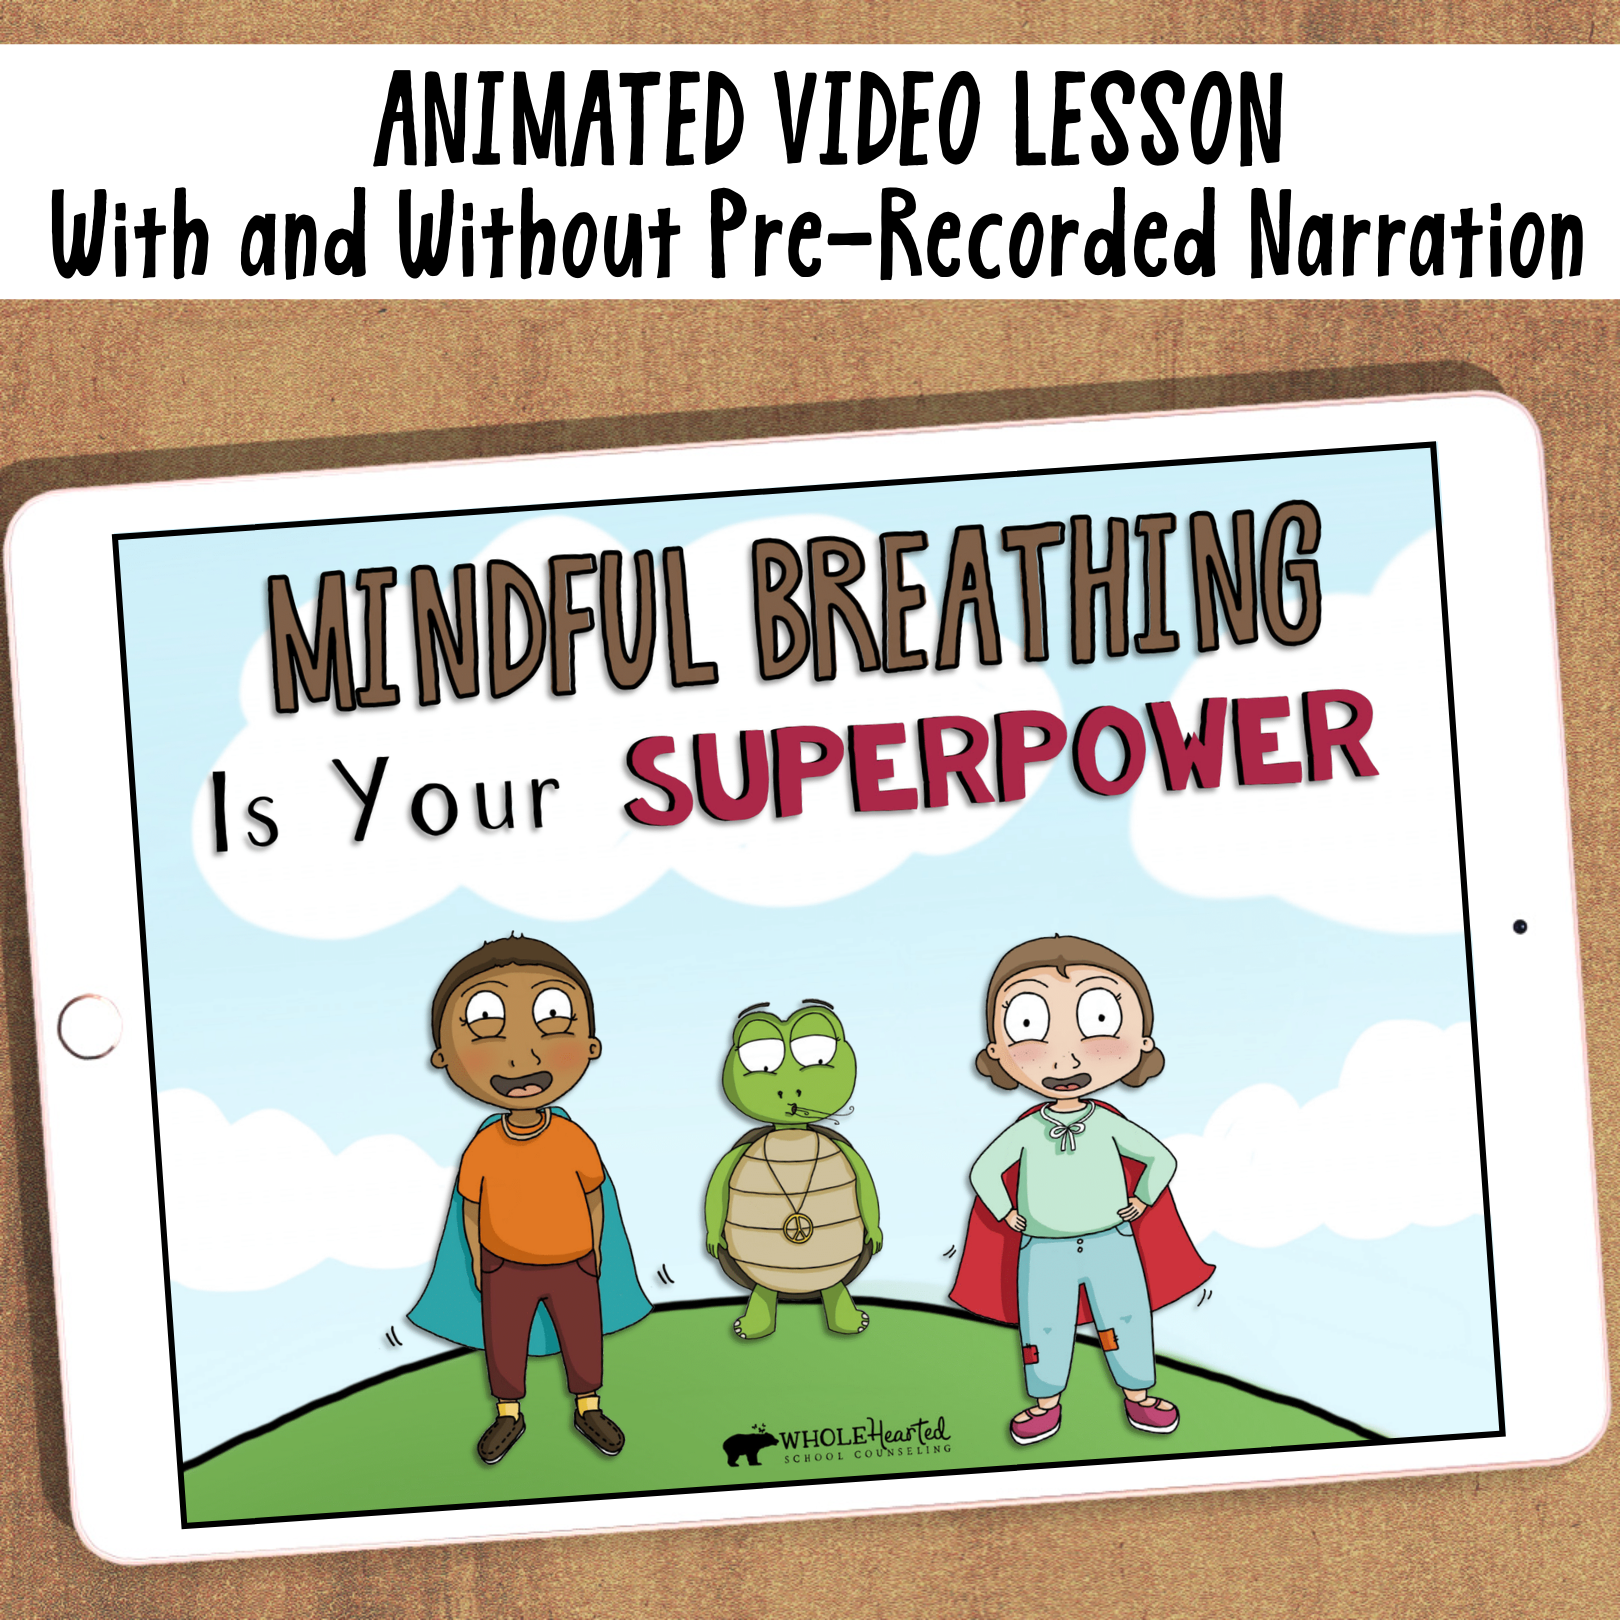 Animated Video Lesson about Breathing Exercises for Kids